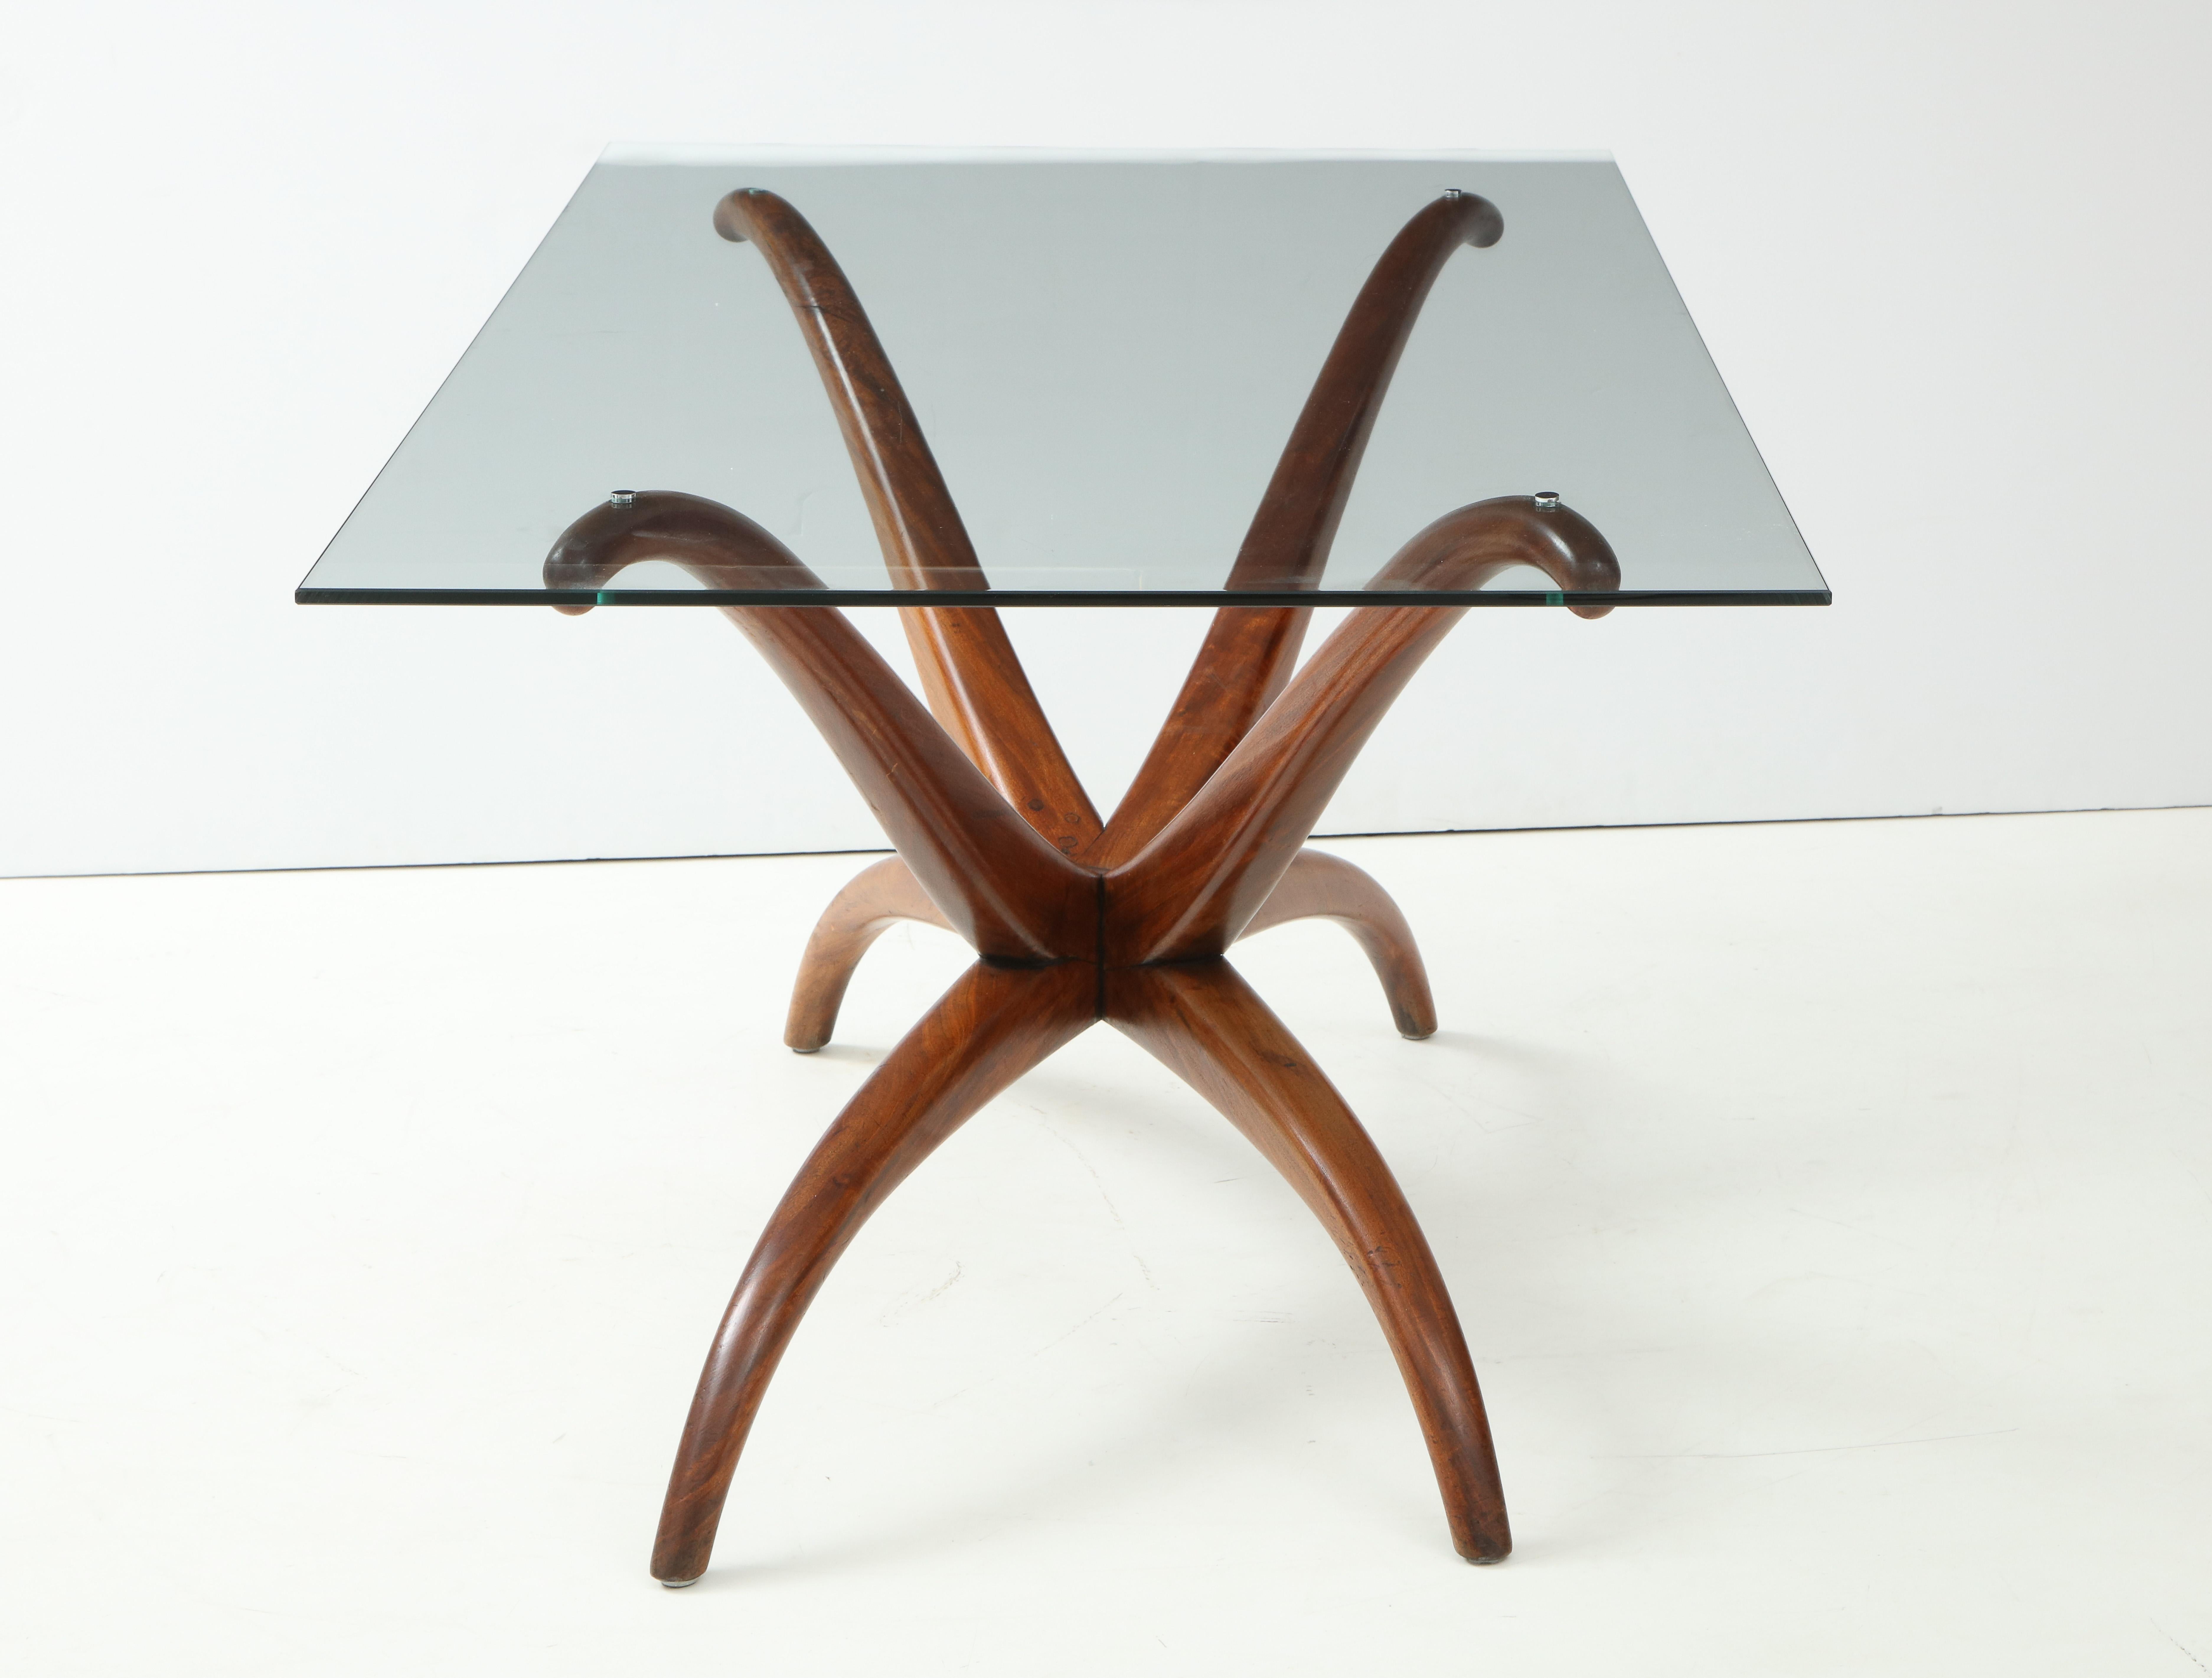 A rare and important 1950s sculptural walnut wood table
By Brazilian mid century master, Giuseppi Scapinelli. The glass top is fitted down into the base with cap screws. Original condition, 
Provenance: Estate of Elie